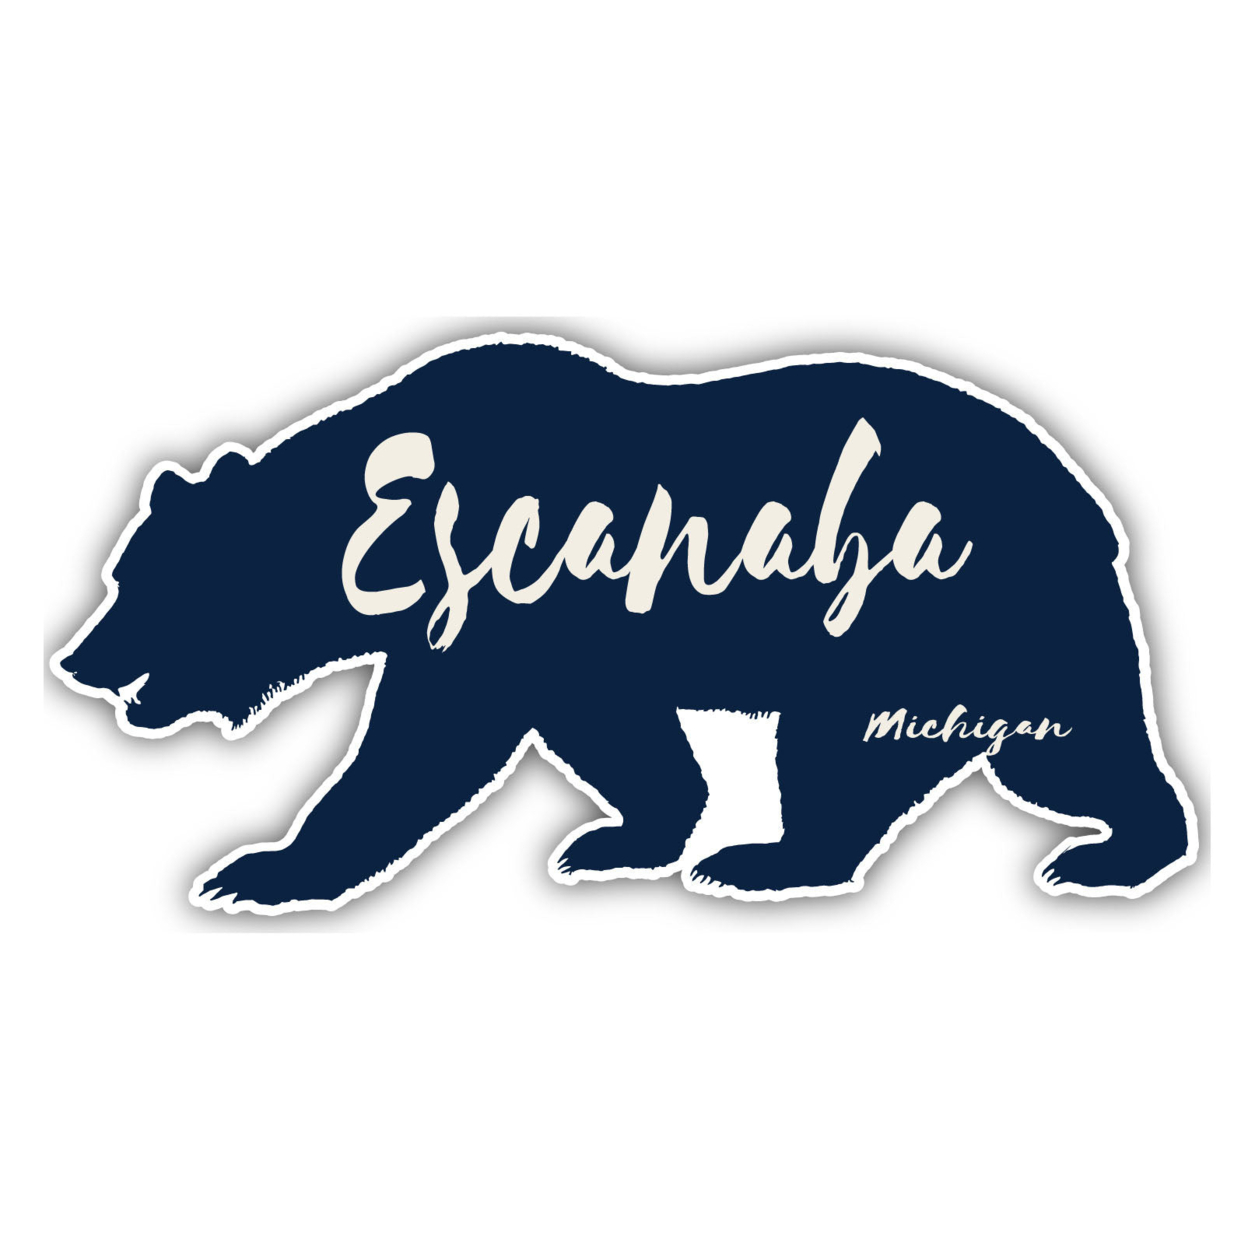 Escanaba Michigan Souvenir Decorative Stickers (Choose Theme And Size) - 4-Pack, 12-Inch, Bear